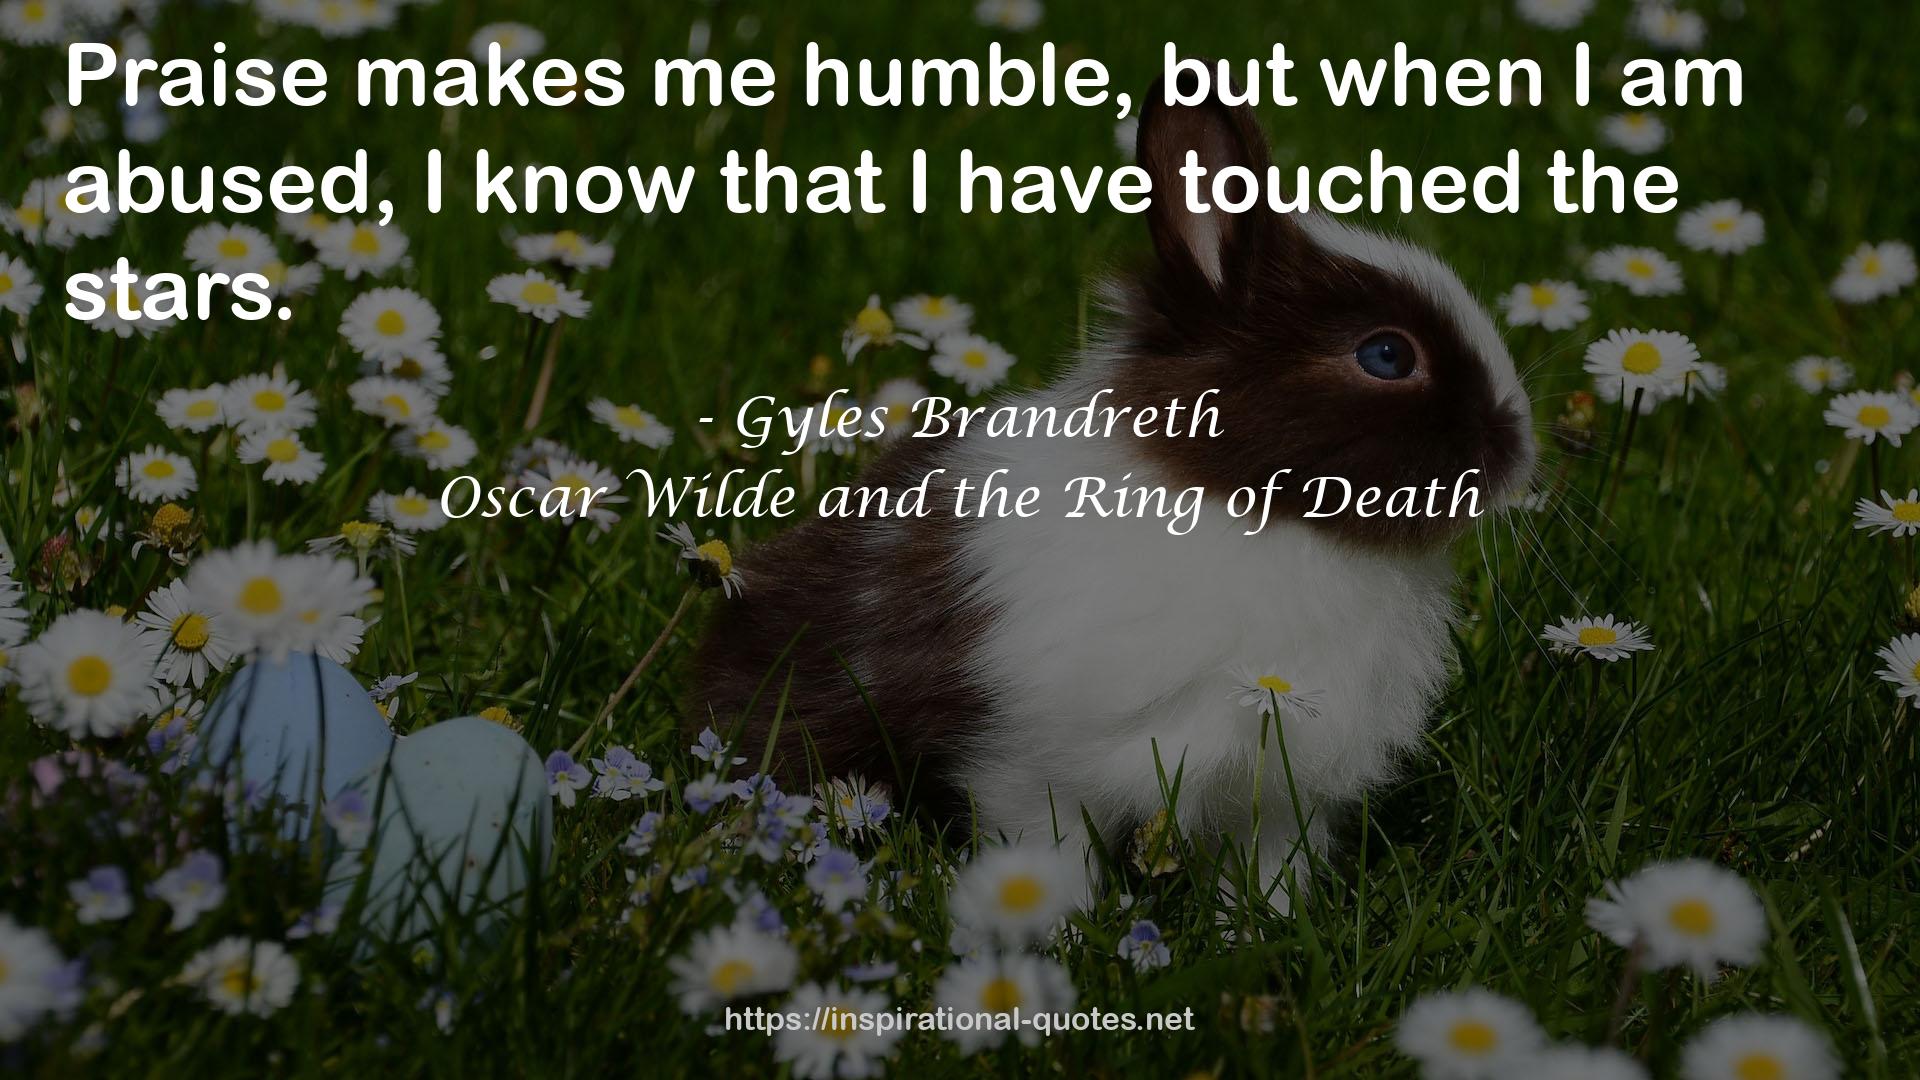 Oscar Wilde and the Ring of Death QUOTES